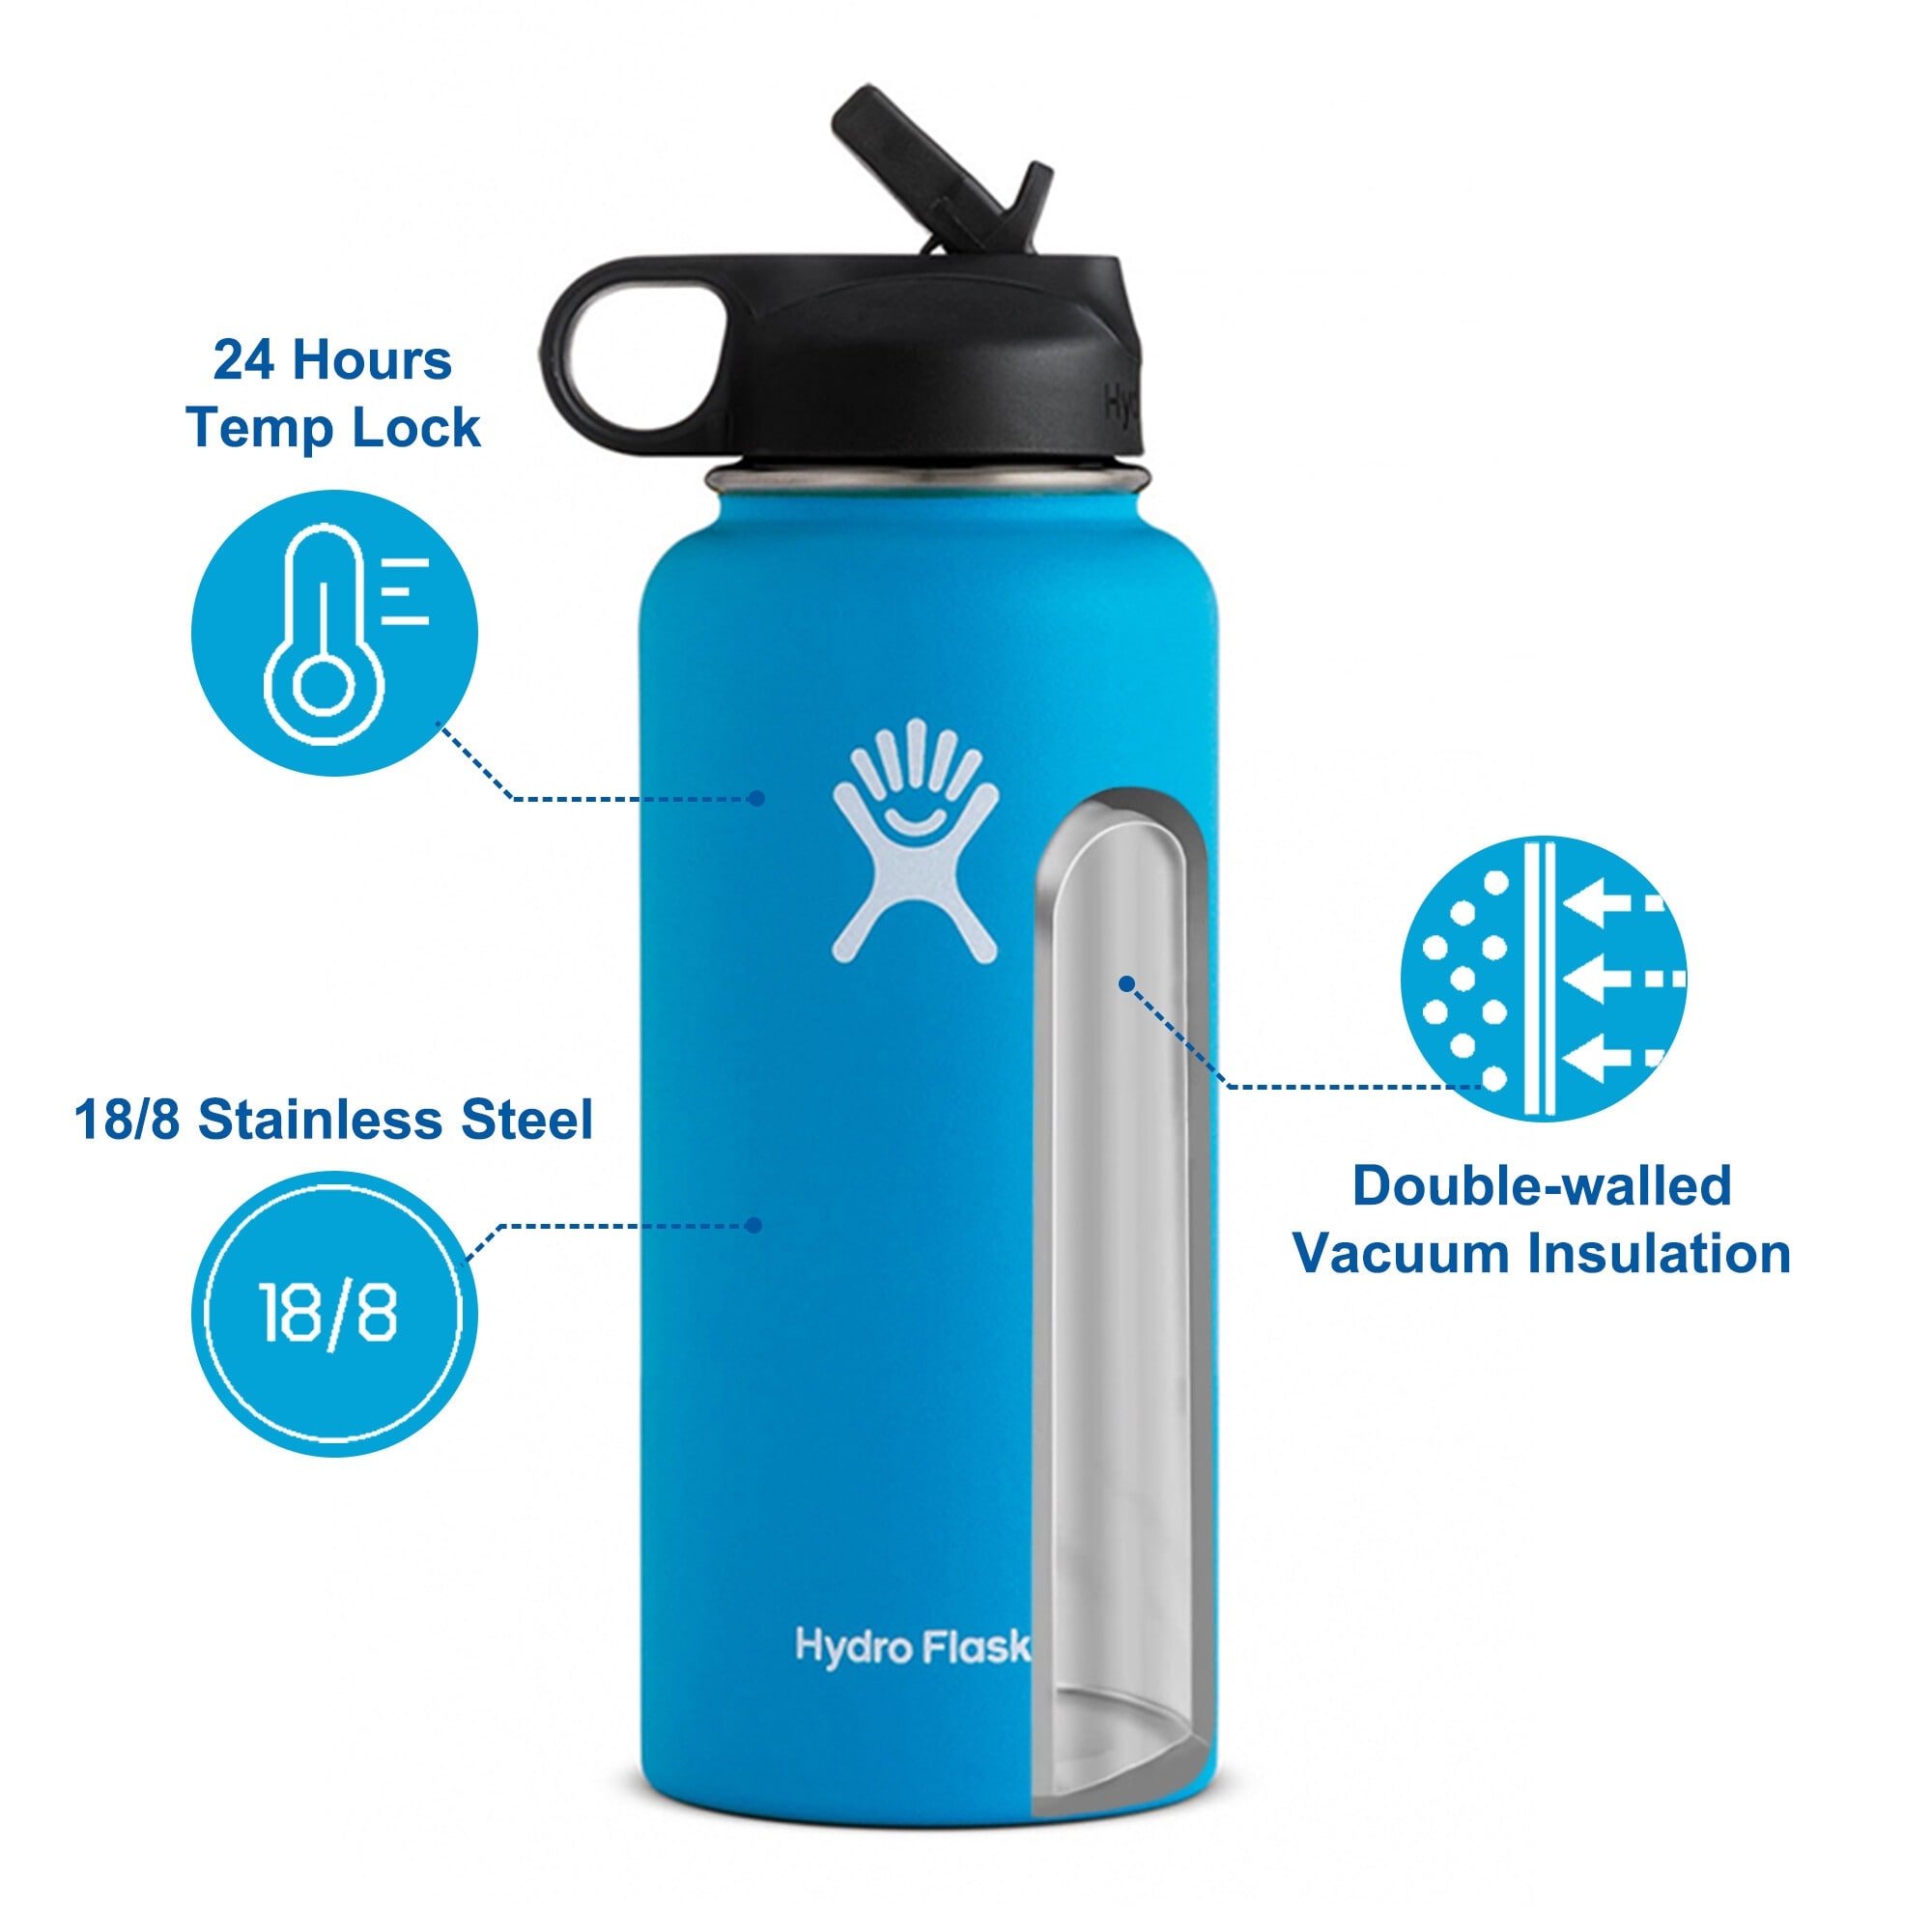 https://ak1.ostkcdn.com/images/products/is/images/direct/4203f3524179f920ae538ad50c058a47ee8b2eda/Hydro-Flask-32oz-Vacuum-Insulated-Stainless-Steel-Water-Bottle-Wide-Mouth-with-Straw-Lid.jpg